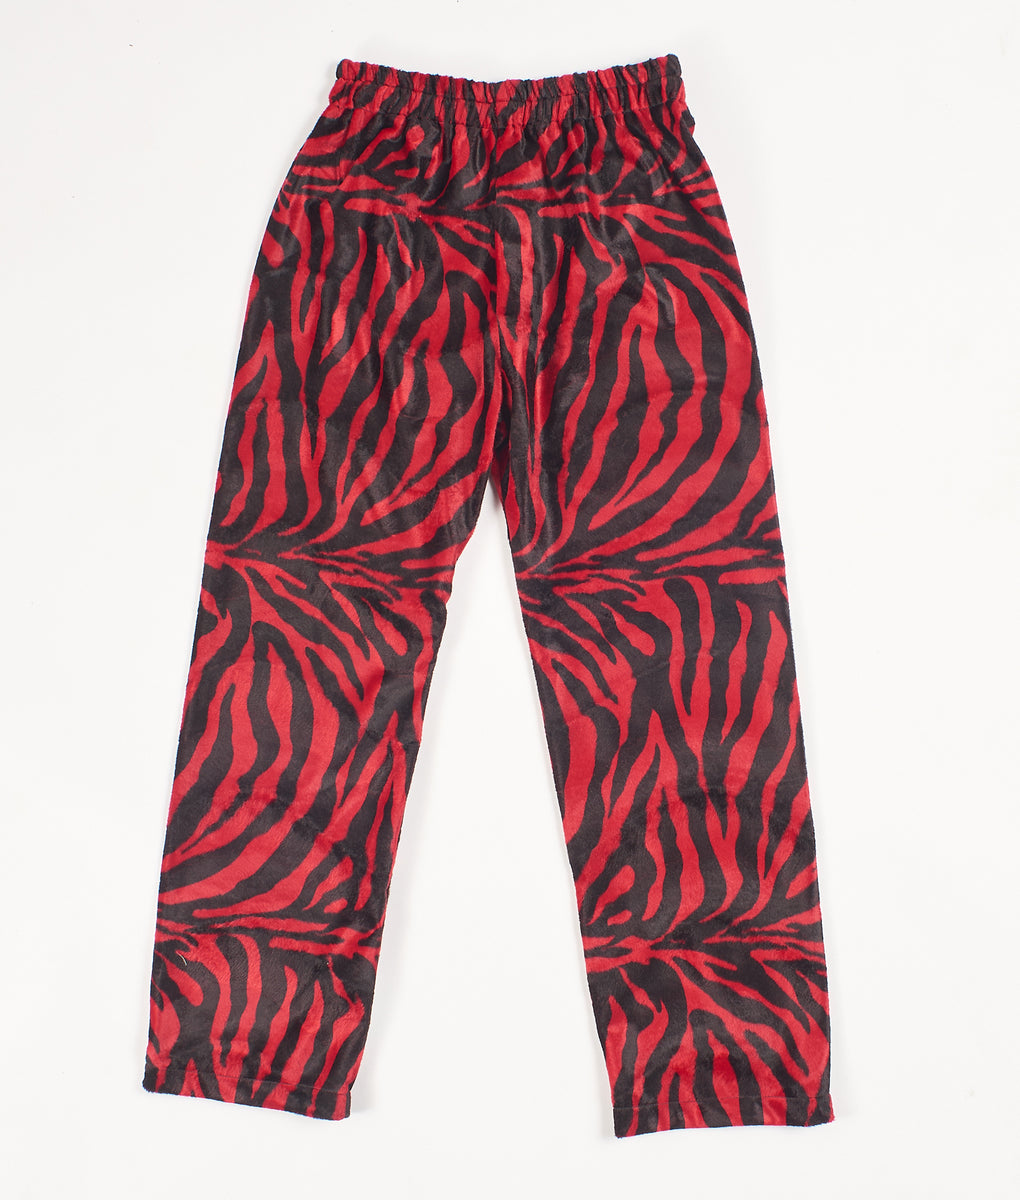 RED ZEBRA PARTY PANTS